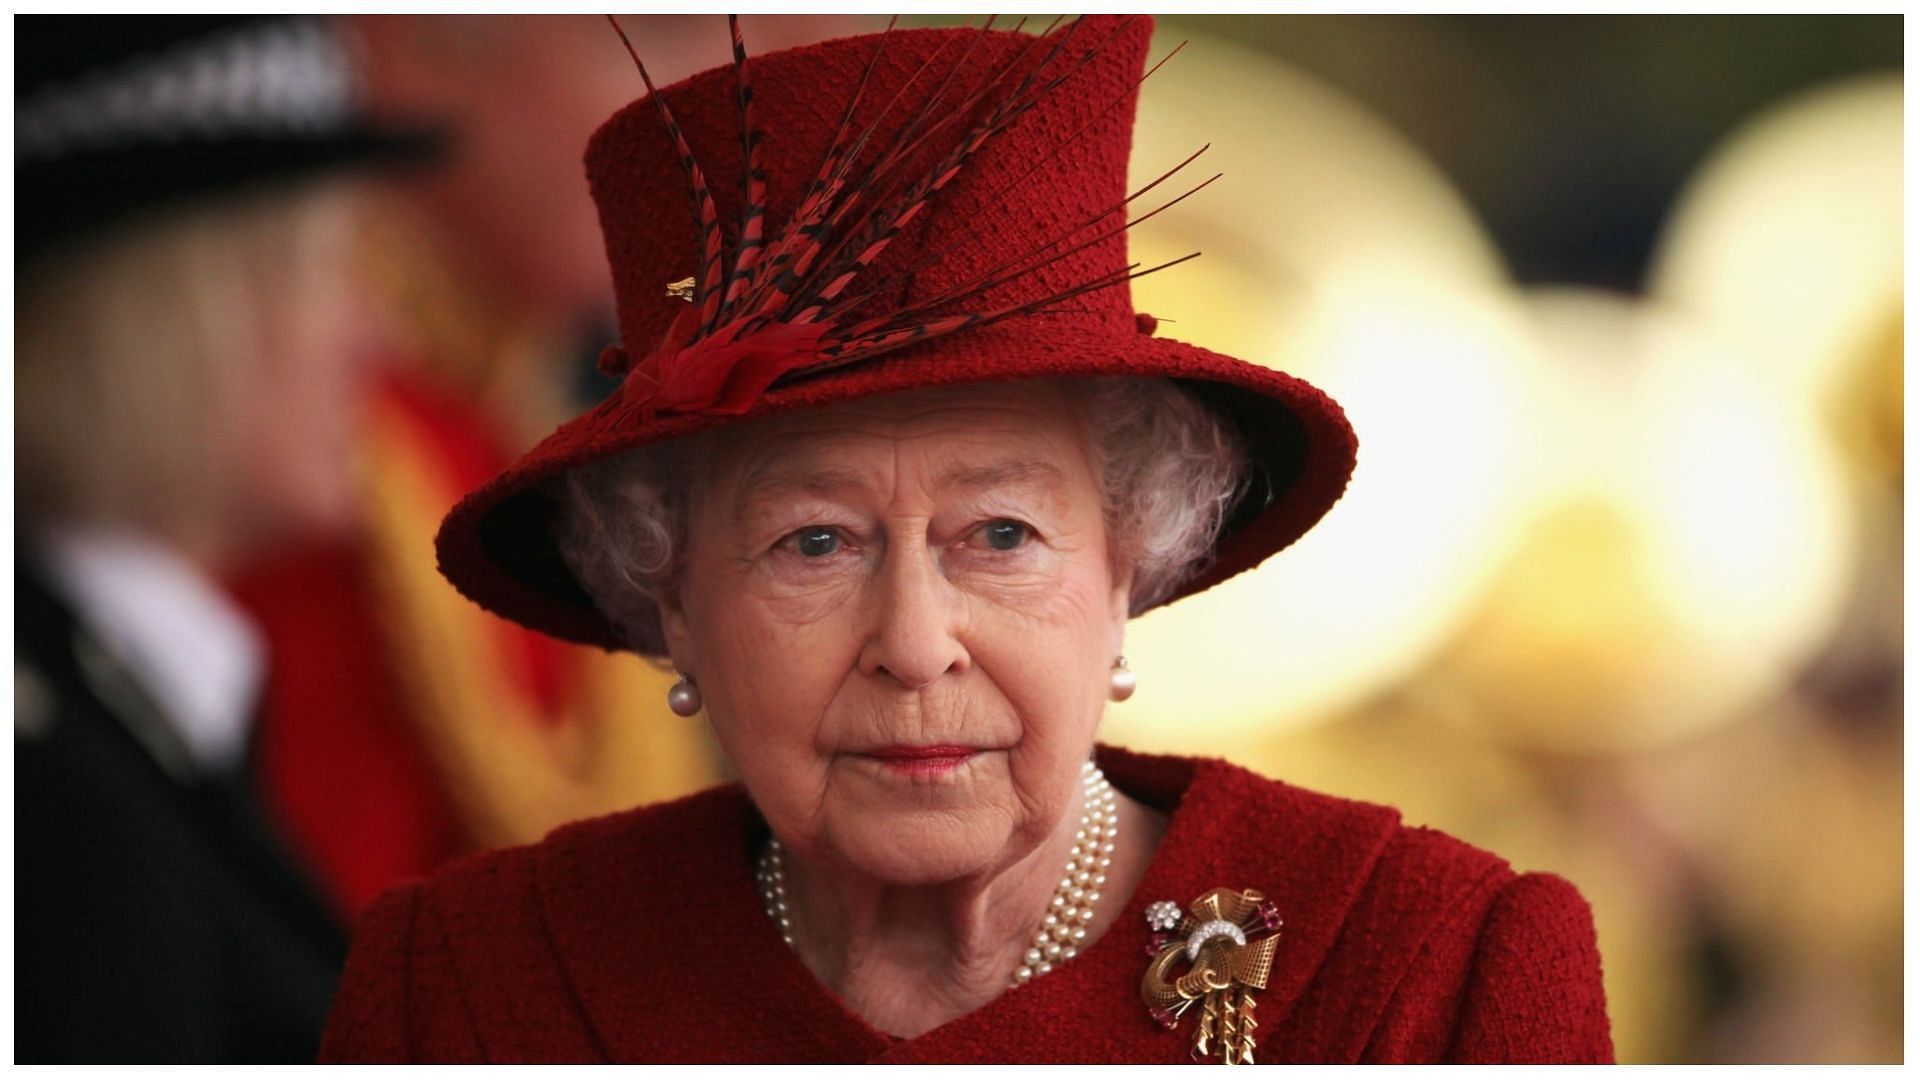 Queen Elizabeth&#039;s funeral will be attended by some well-known personalities (Image via Dan Kitwood/Getty Images)